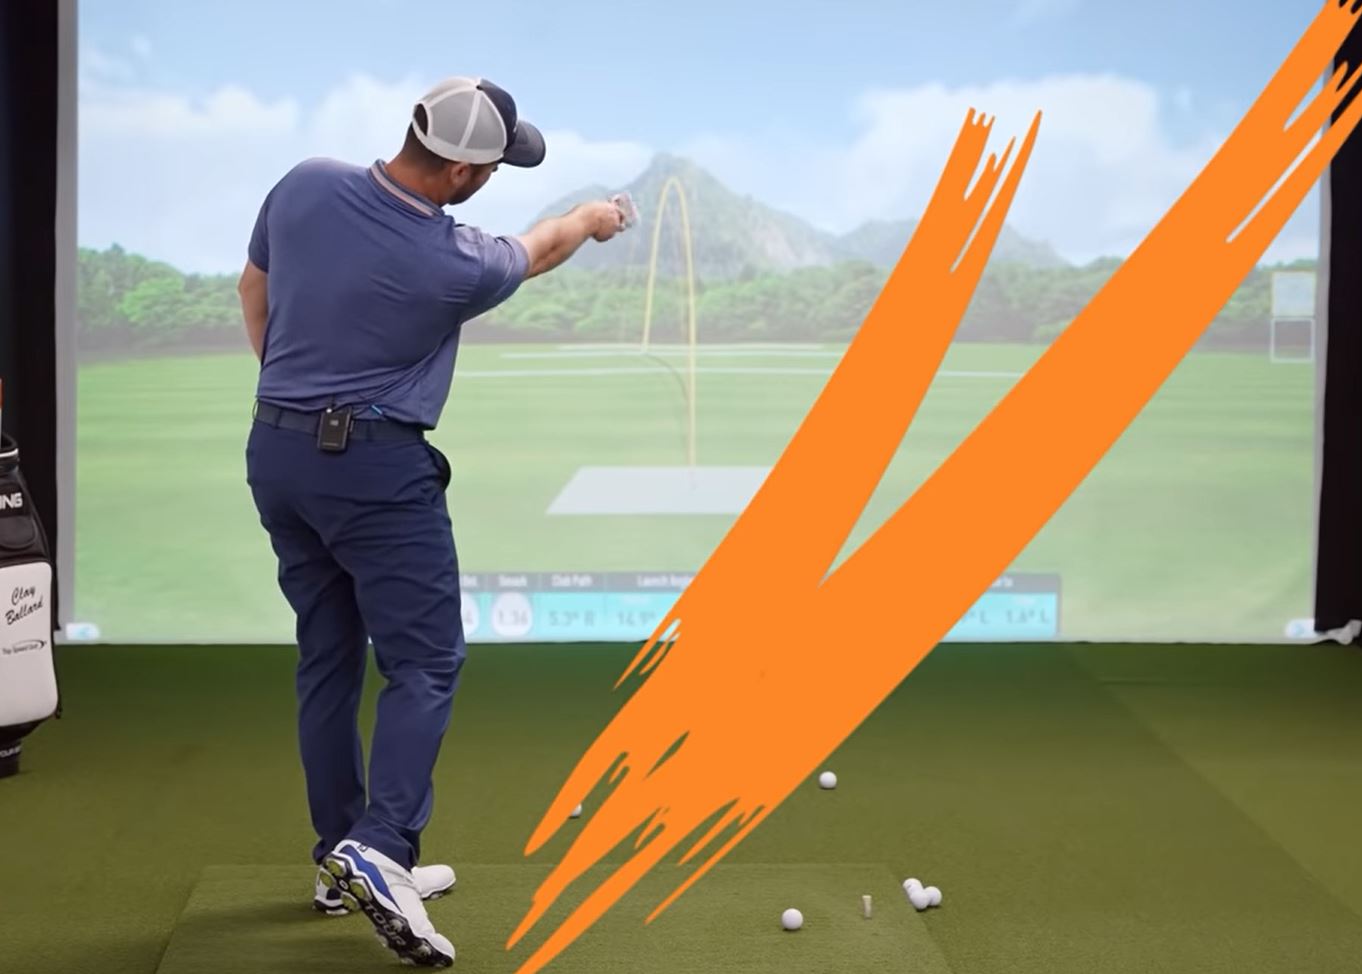 Possibly The EASIEST Way to Improve ANY Golf Swing